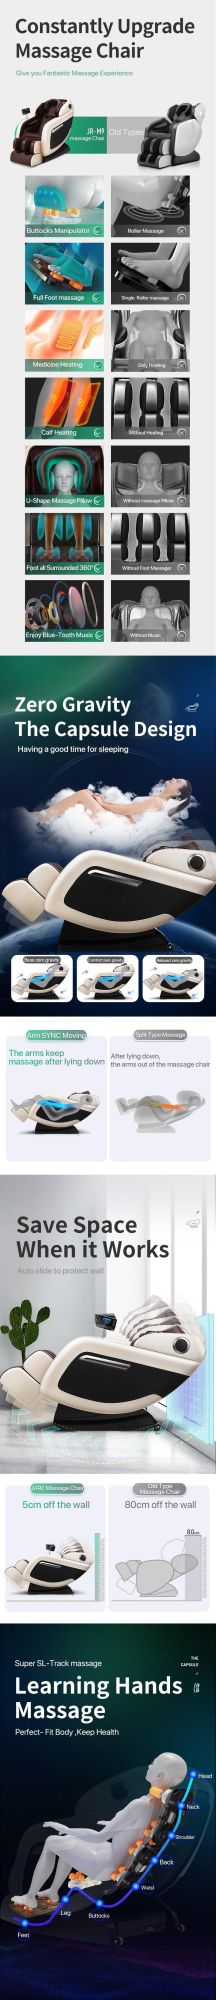 High Quality Power Full Body Airbags Irest Massage Chair